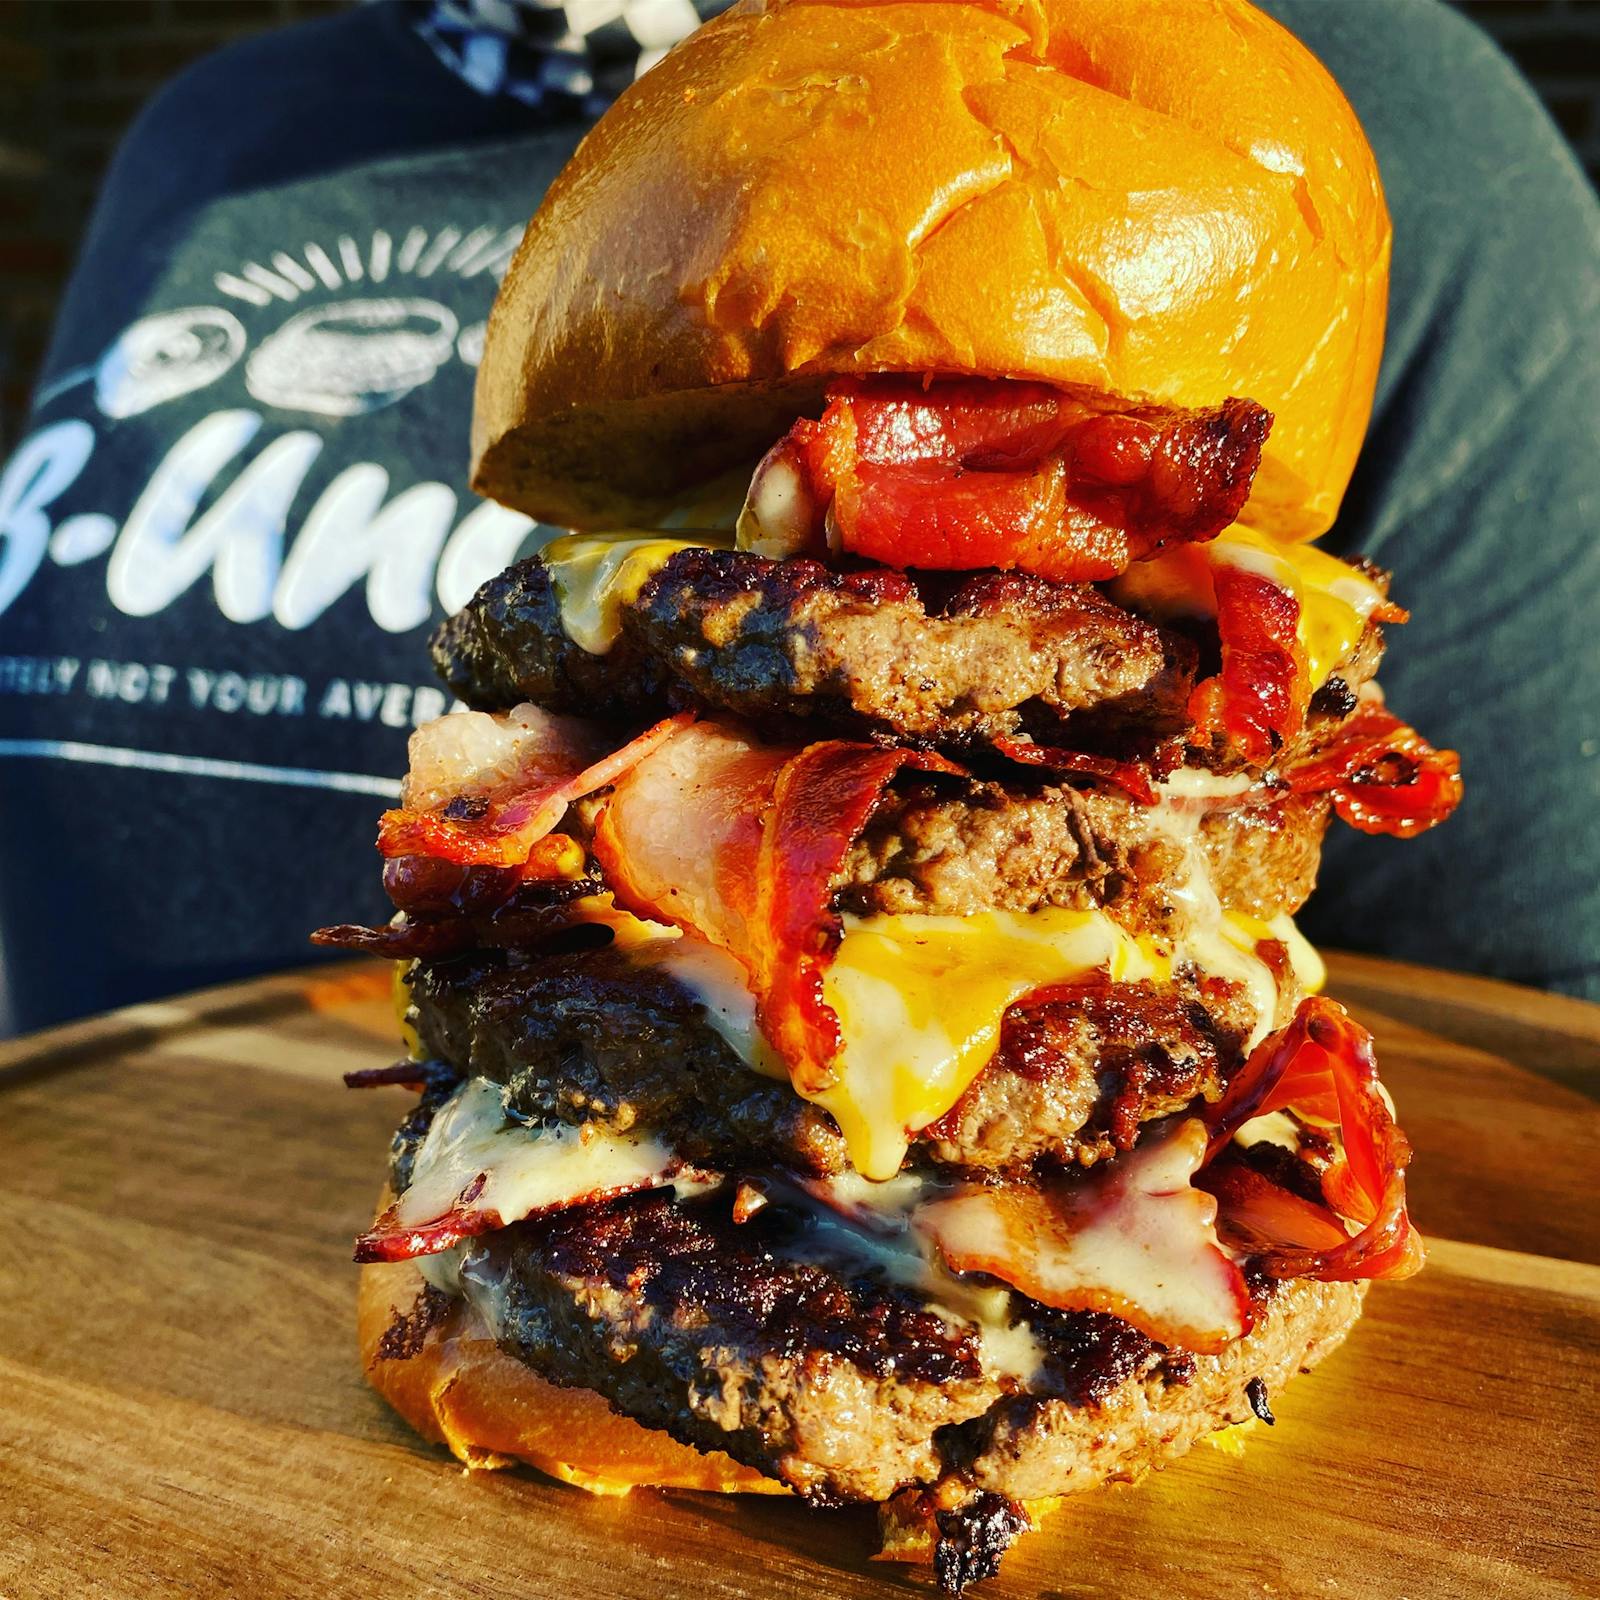 Image of B-Unos famous burger loaded with tons of patties, bacon and cheese